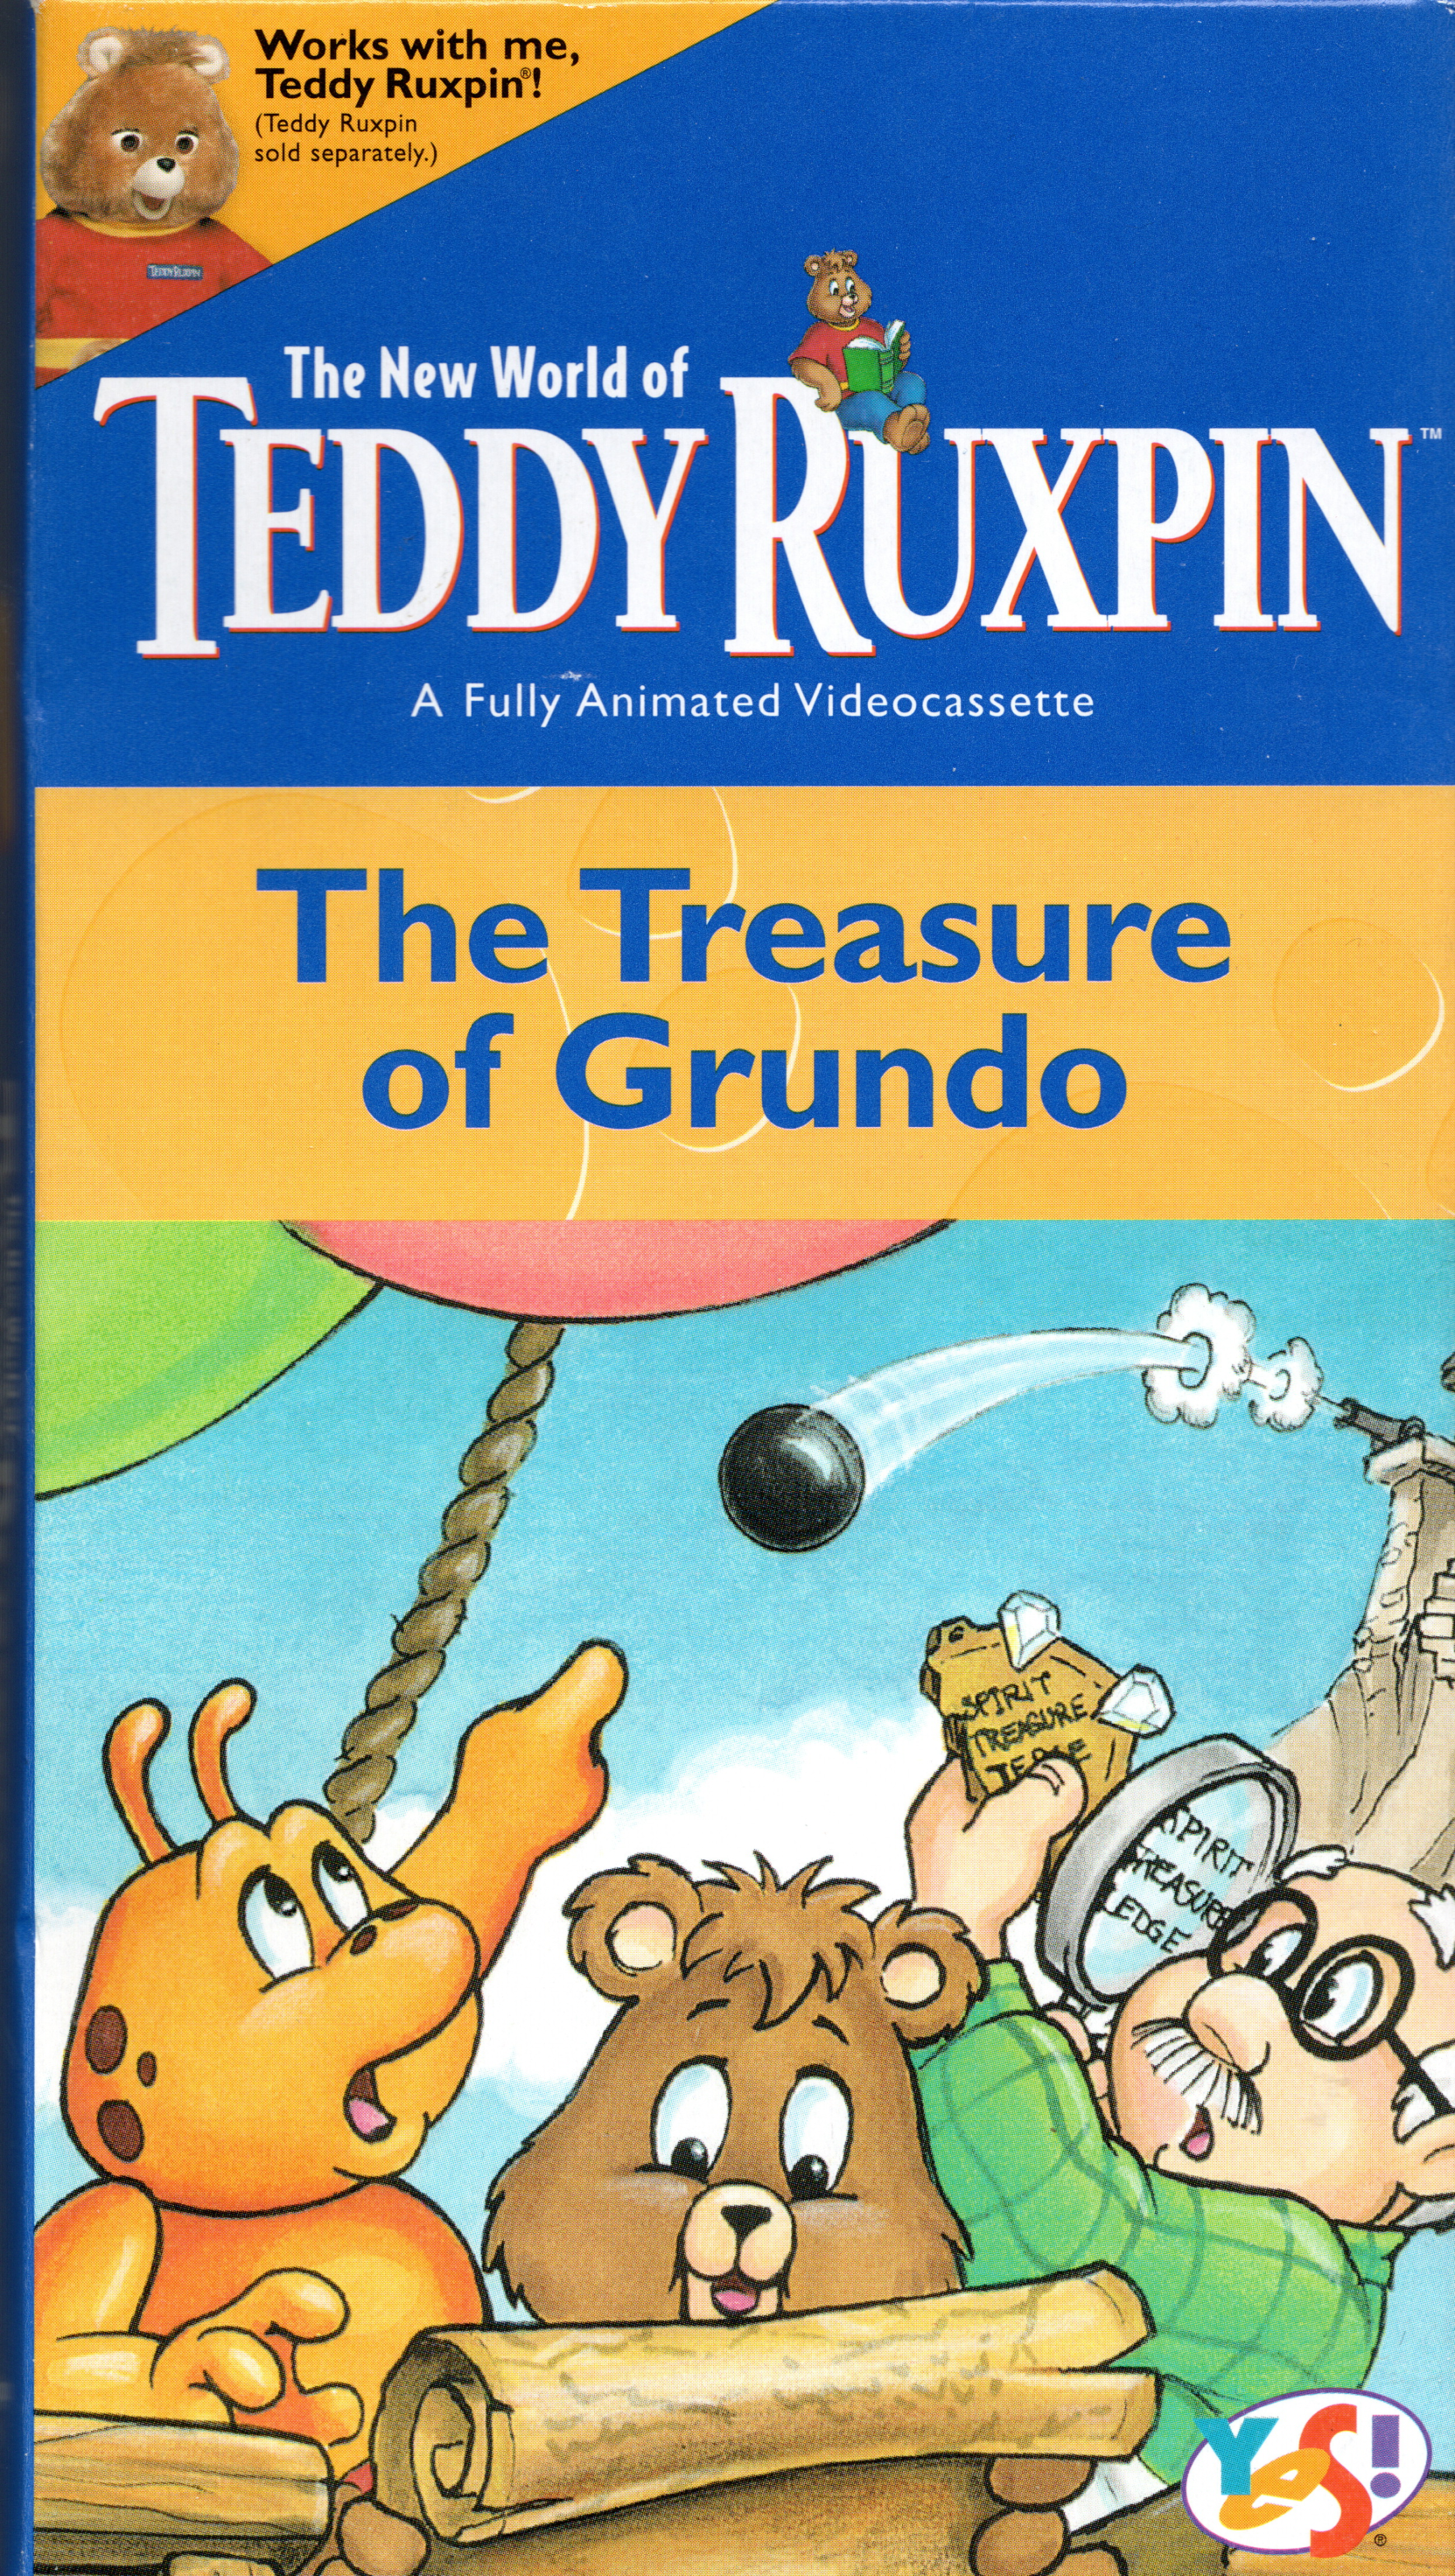 The New World Of Teddy Ruxpin: "The Treasure of Grundo" (1998 re-release with voiceover)